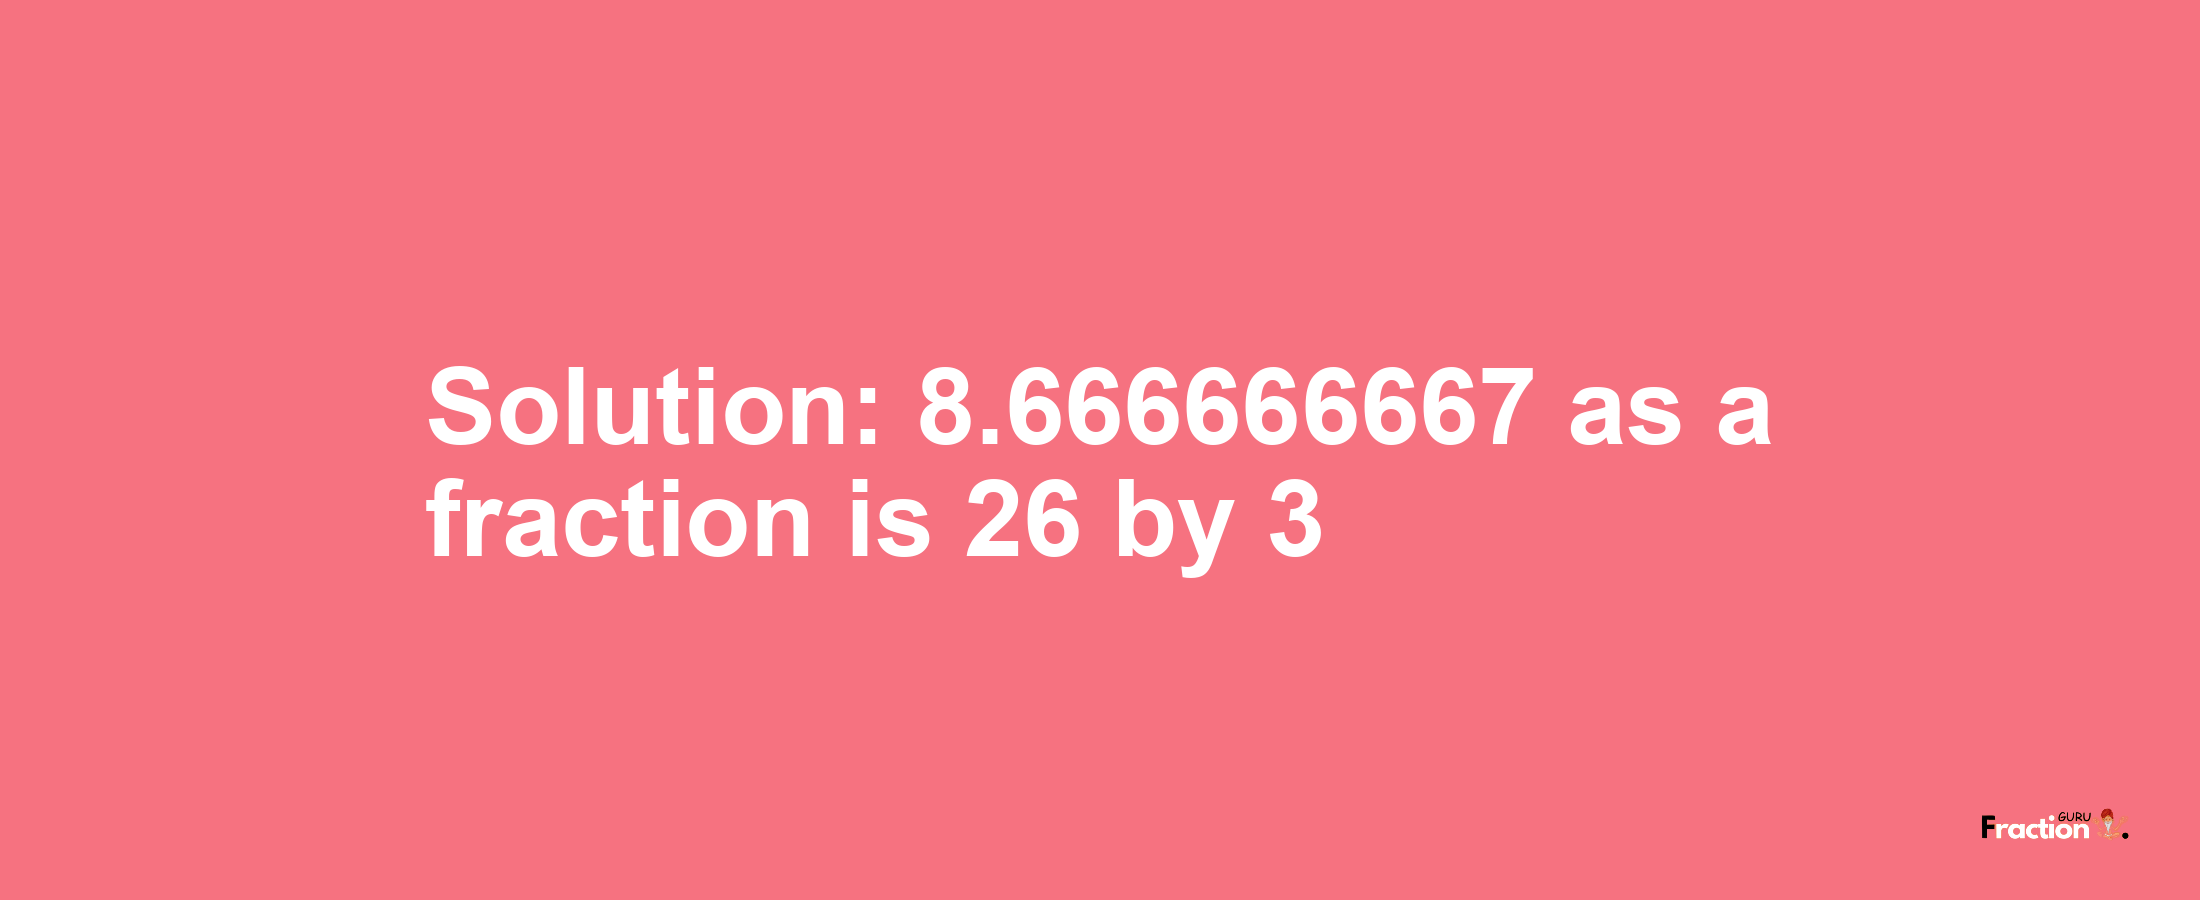 Solution:8.666666667 as a fraction is 26/3